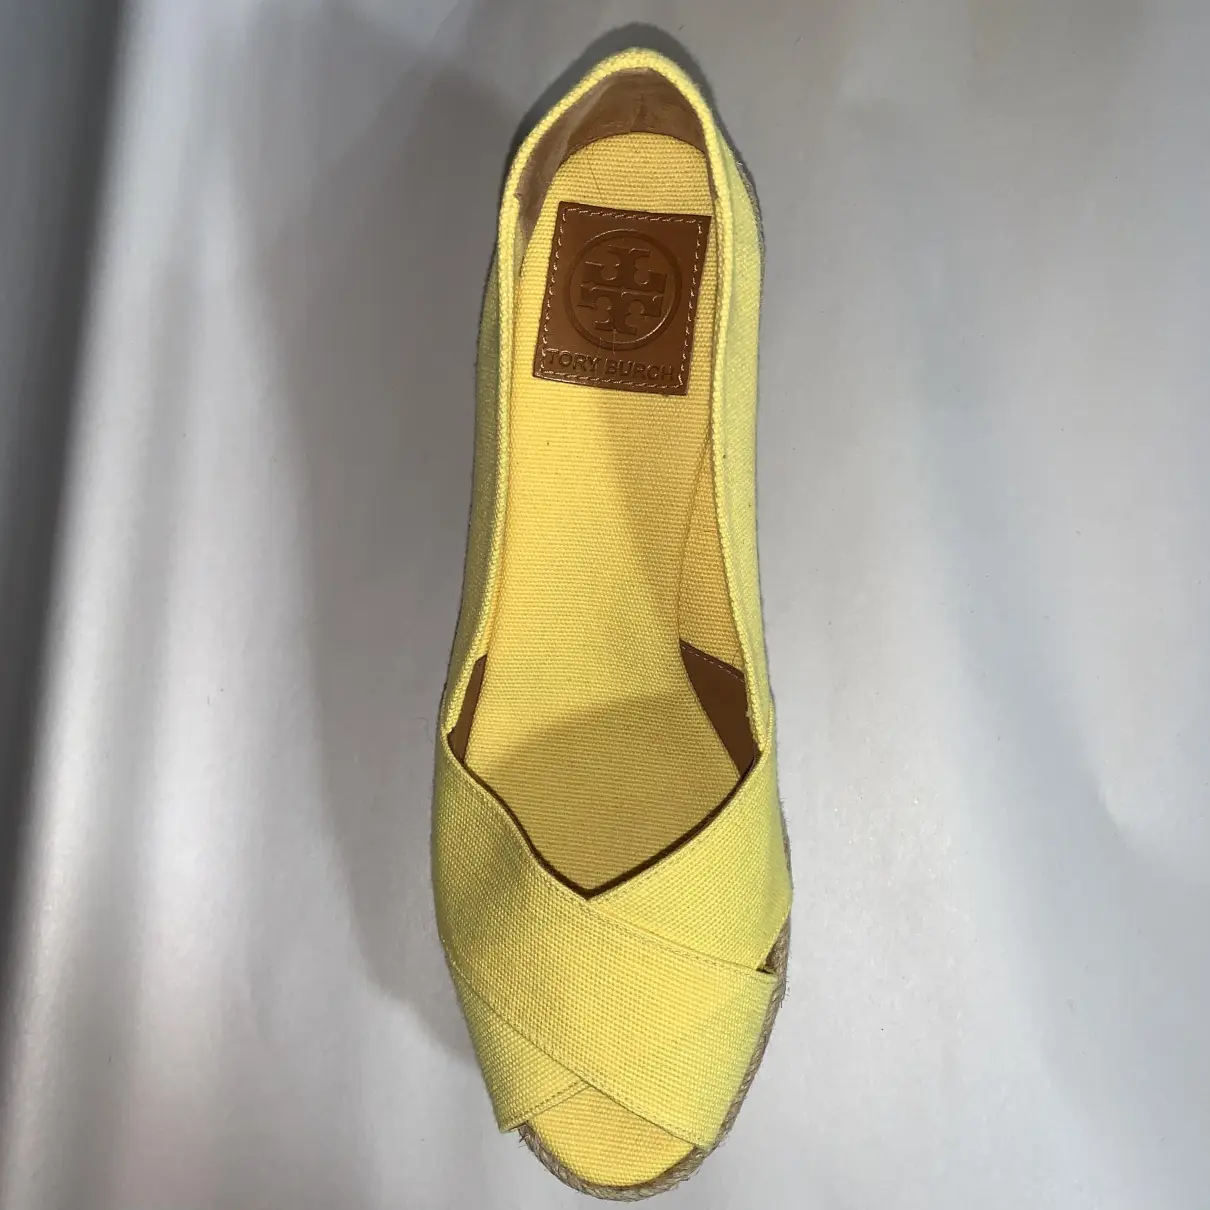 Tory Burch Cloth espadrilles for sale